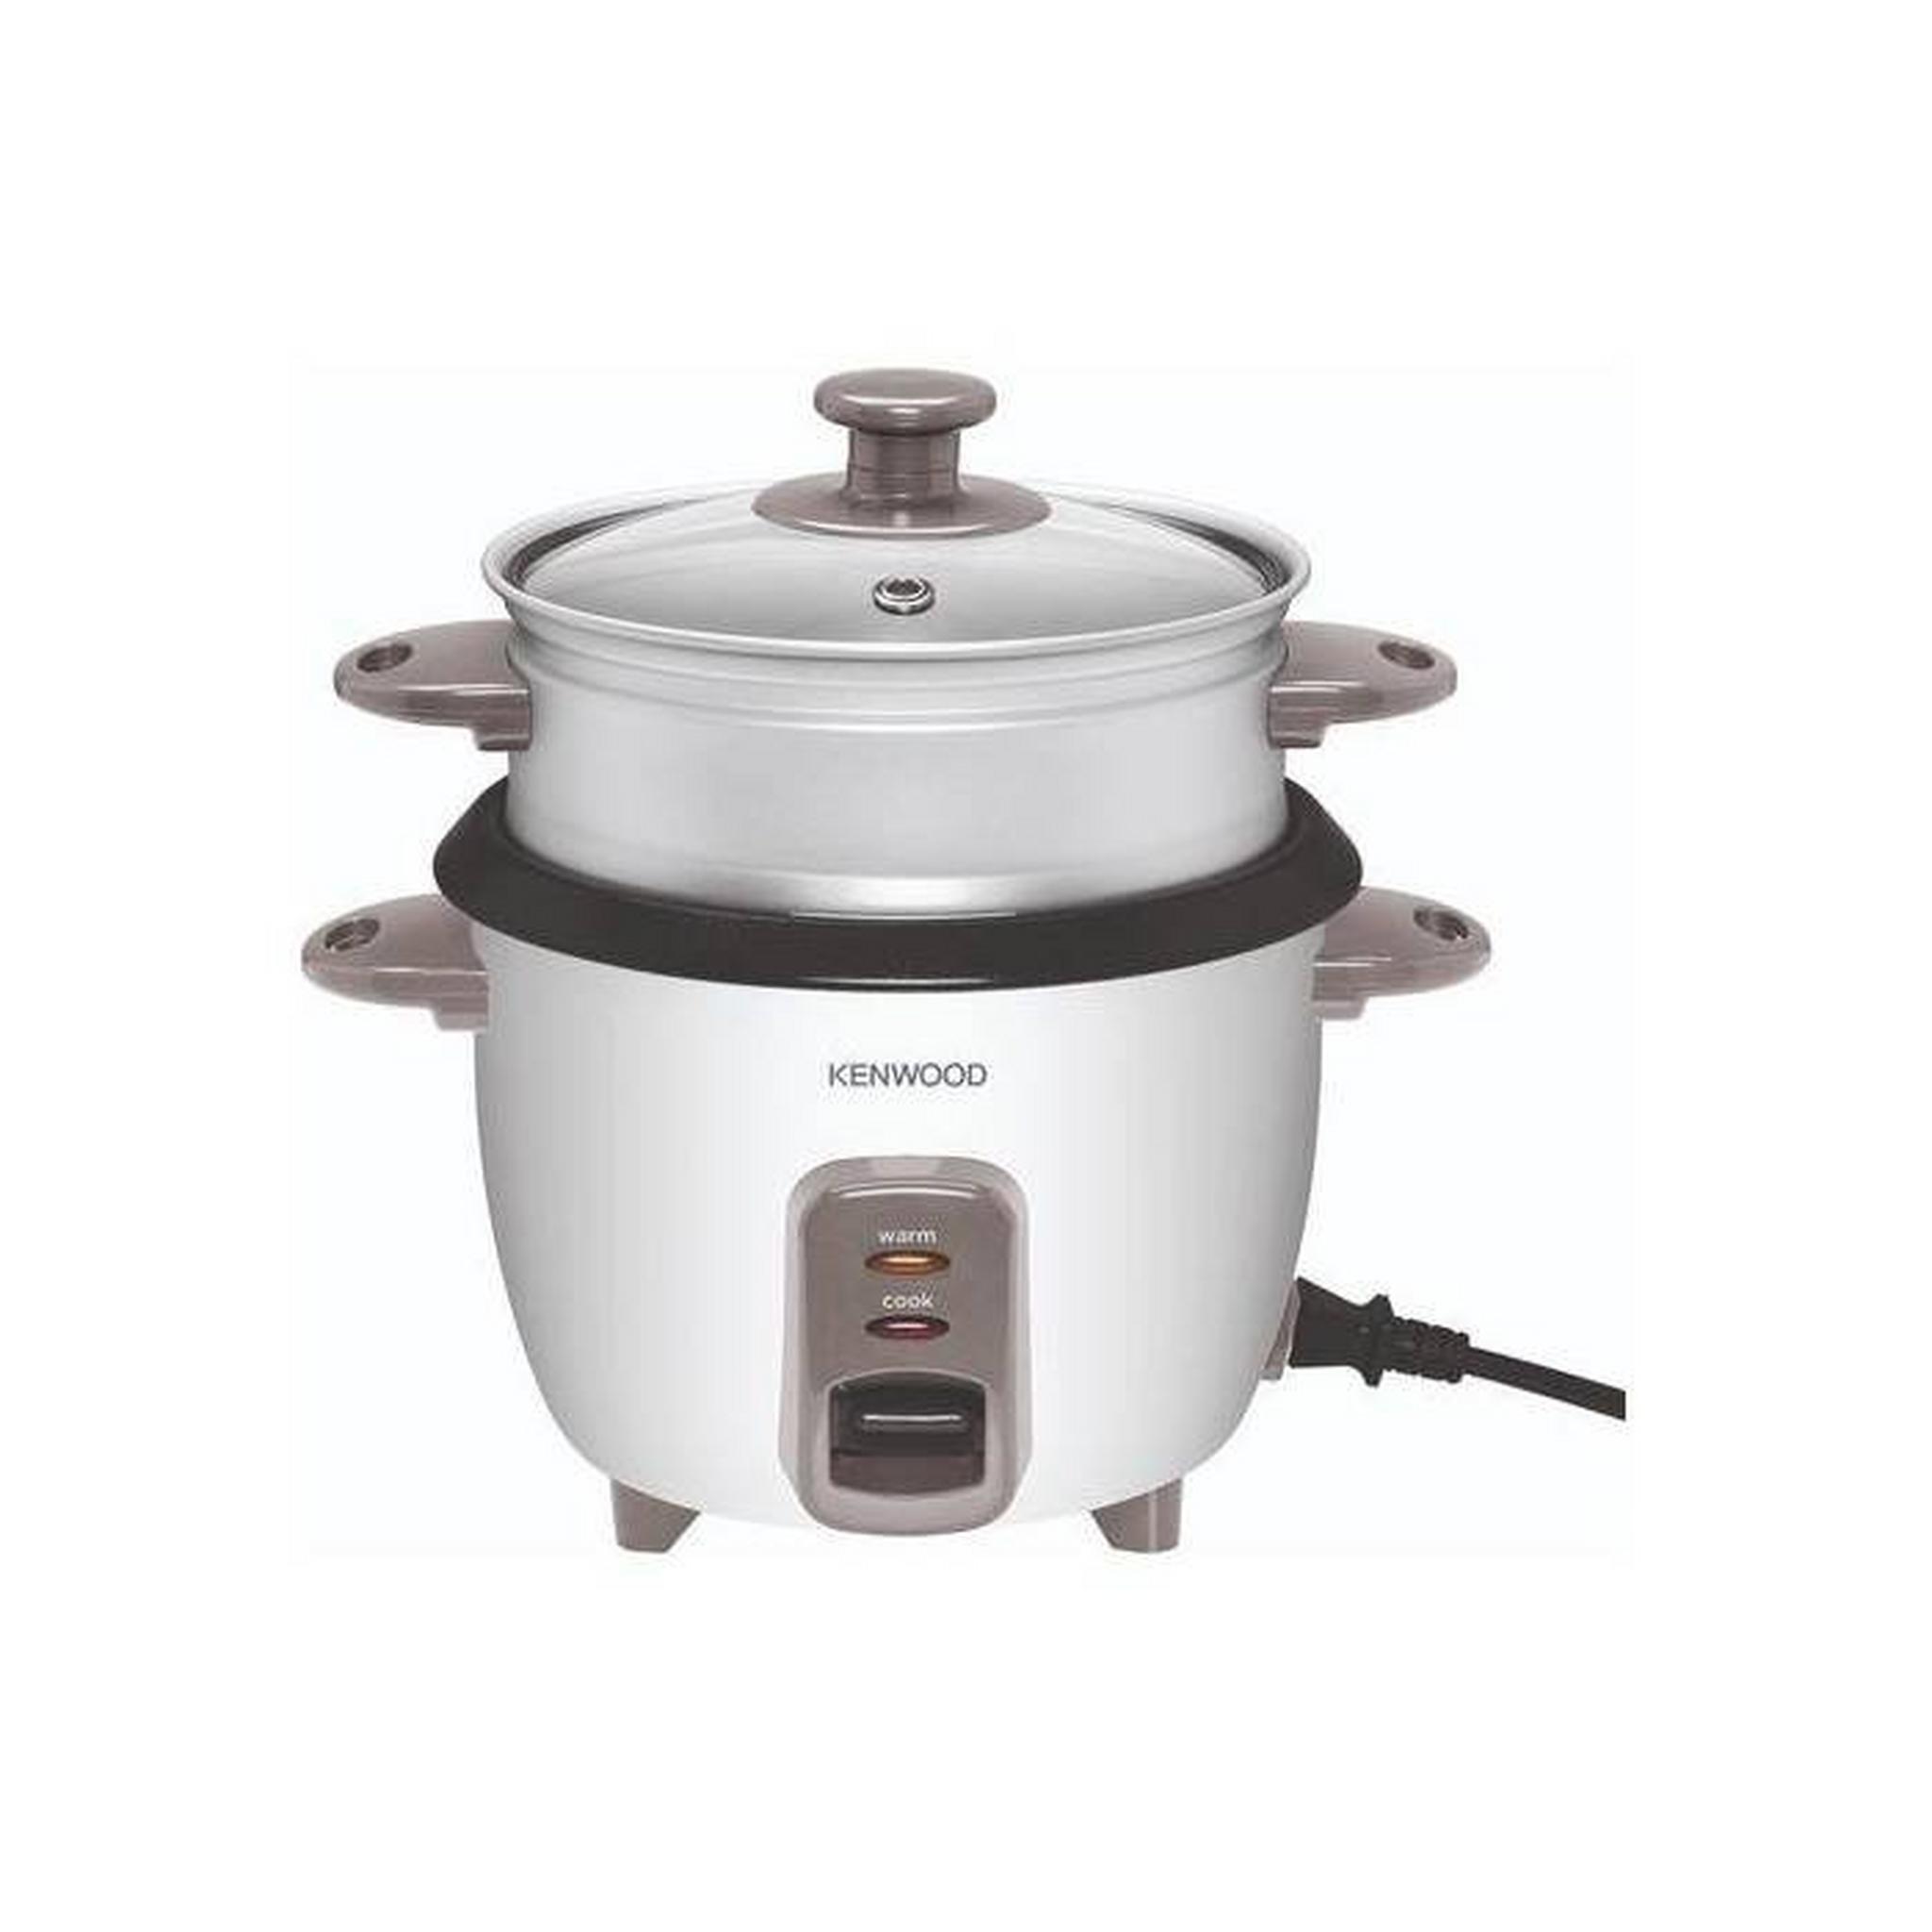 Kenwood Rice Cooker 300W 0.6 Liters – (RCM29.A0WH)